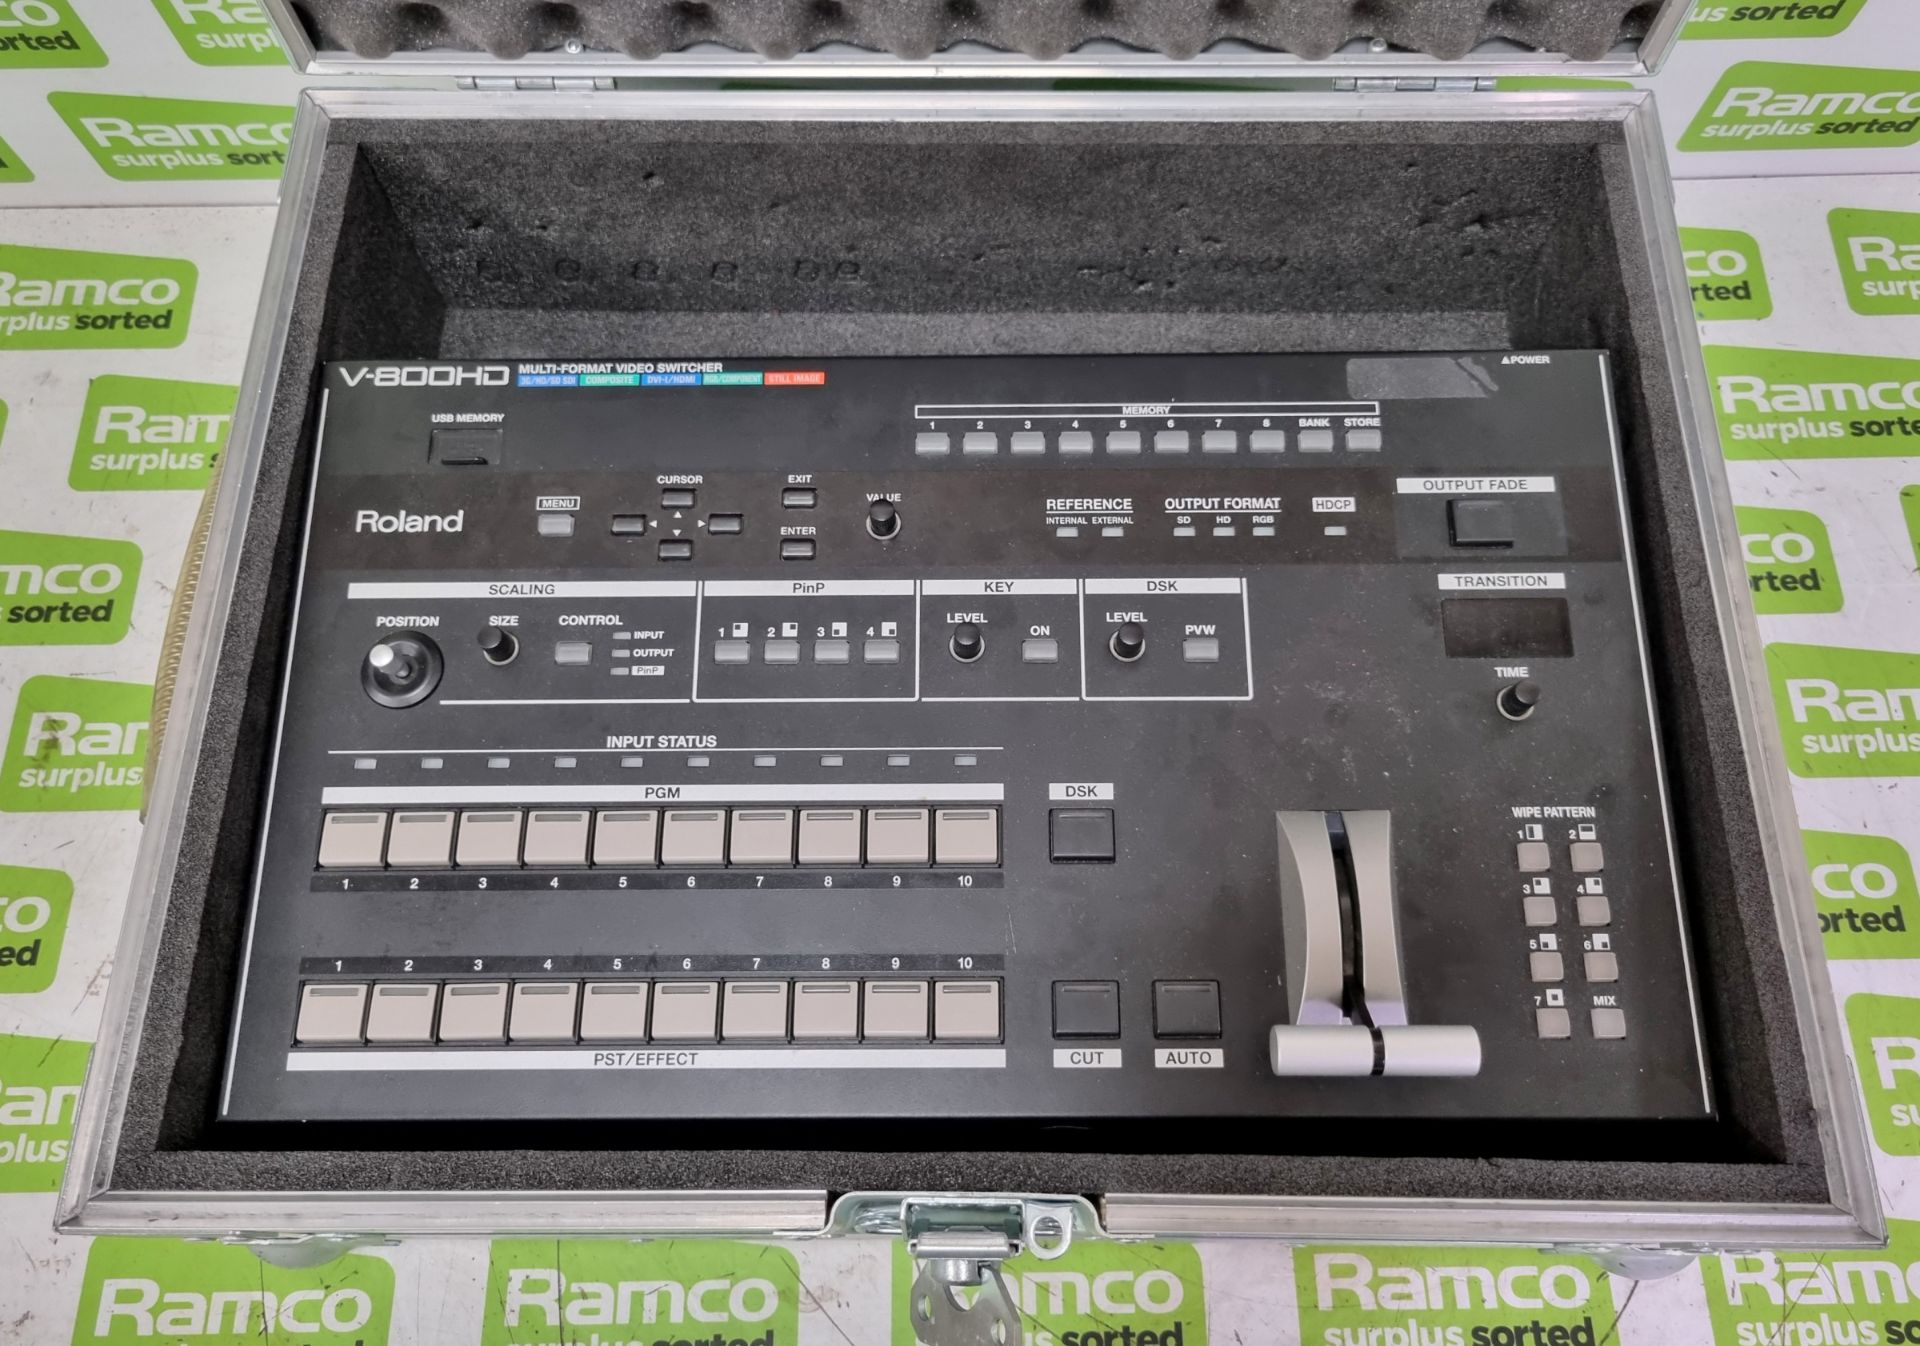 Roland V-800HD multi-format video switcher with flight case - FAULTY (OUTPUT 3/4 FREEZING)